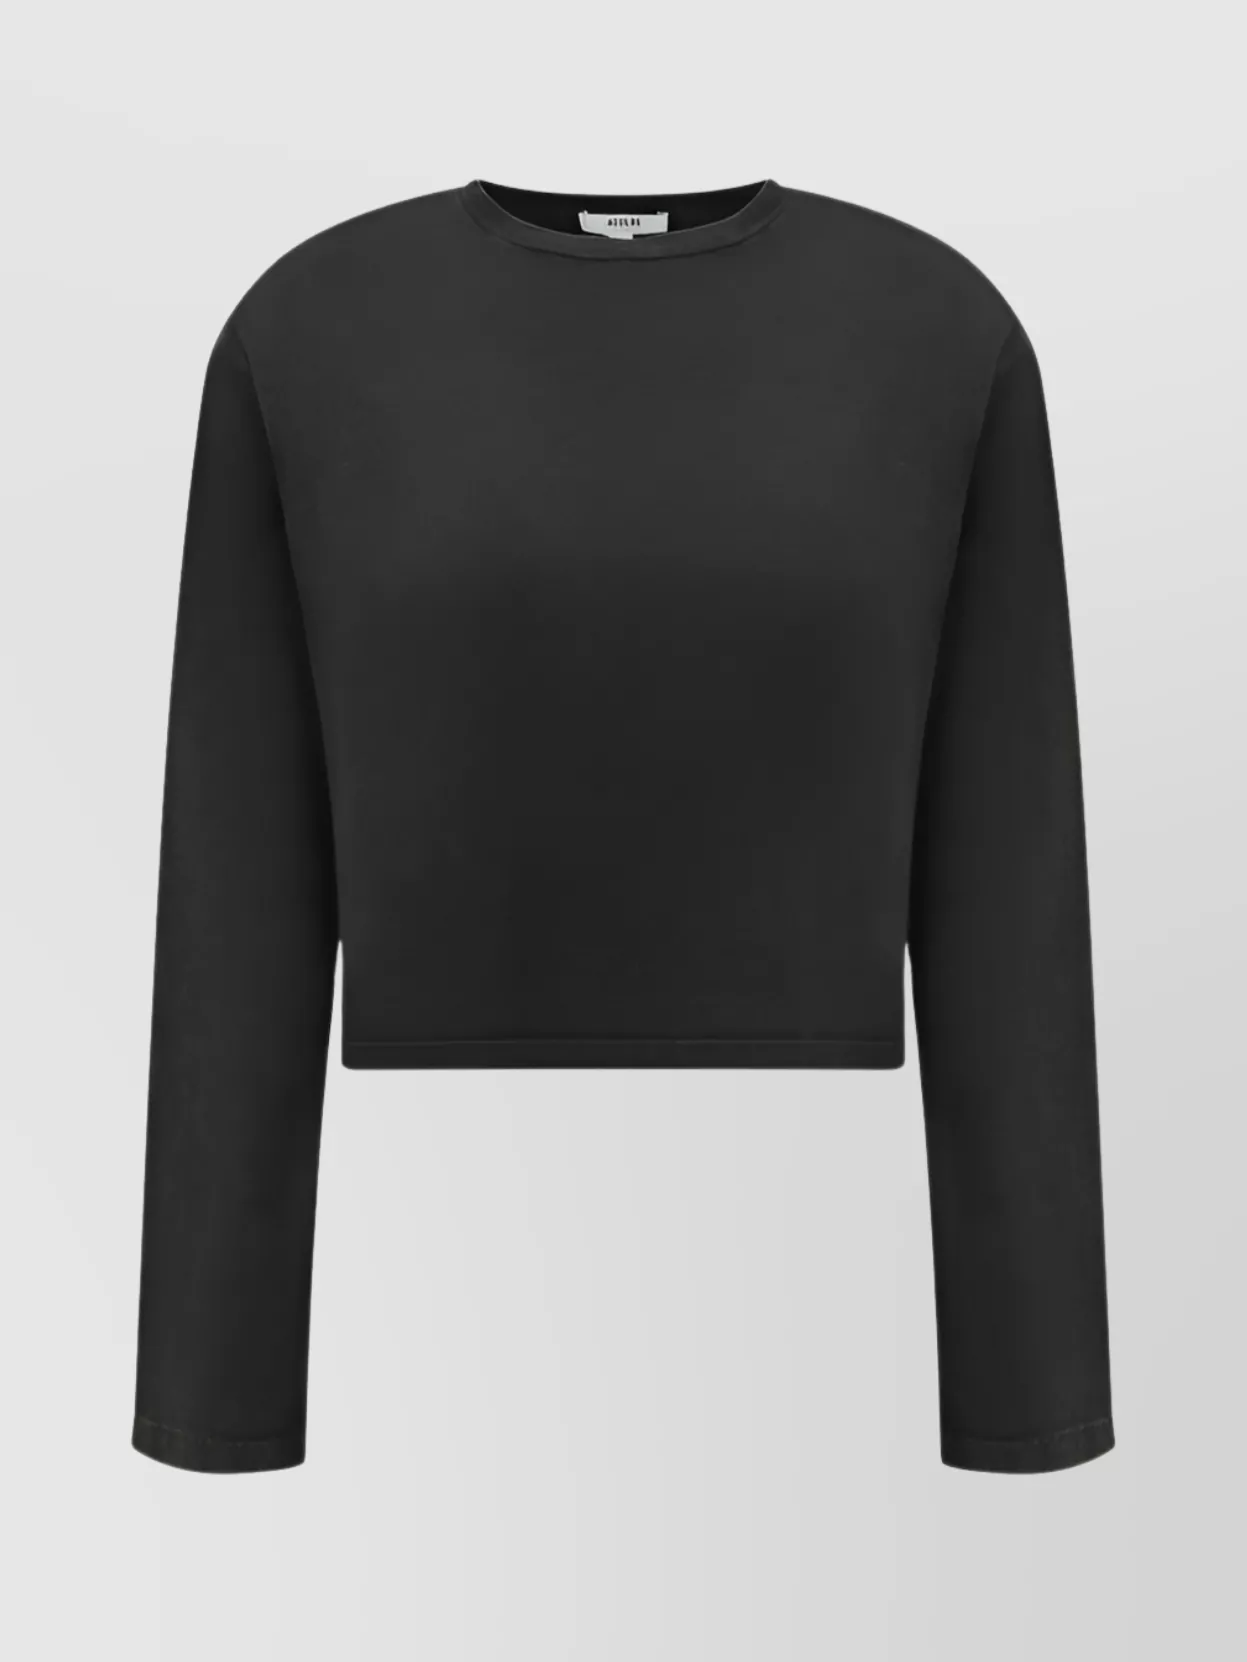 Shop Agolde Cropped Long Sleeve Monochrome Top